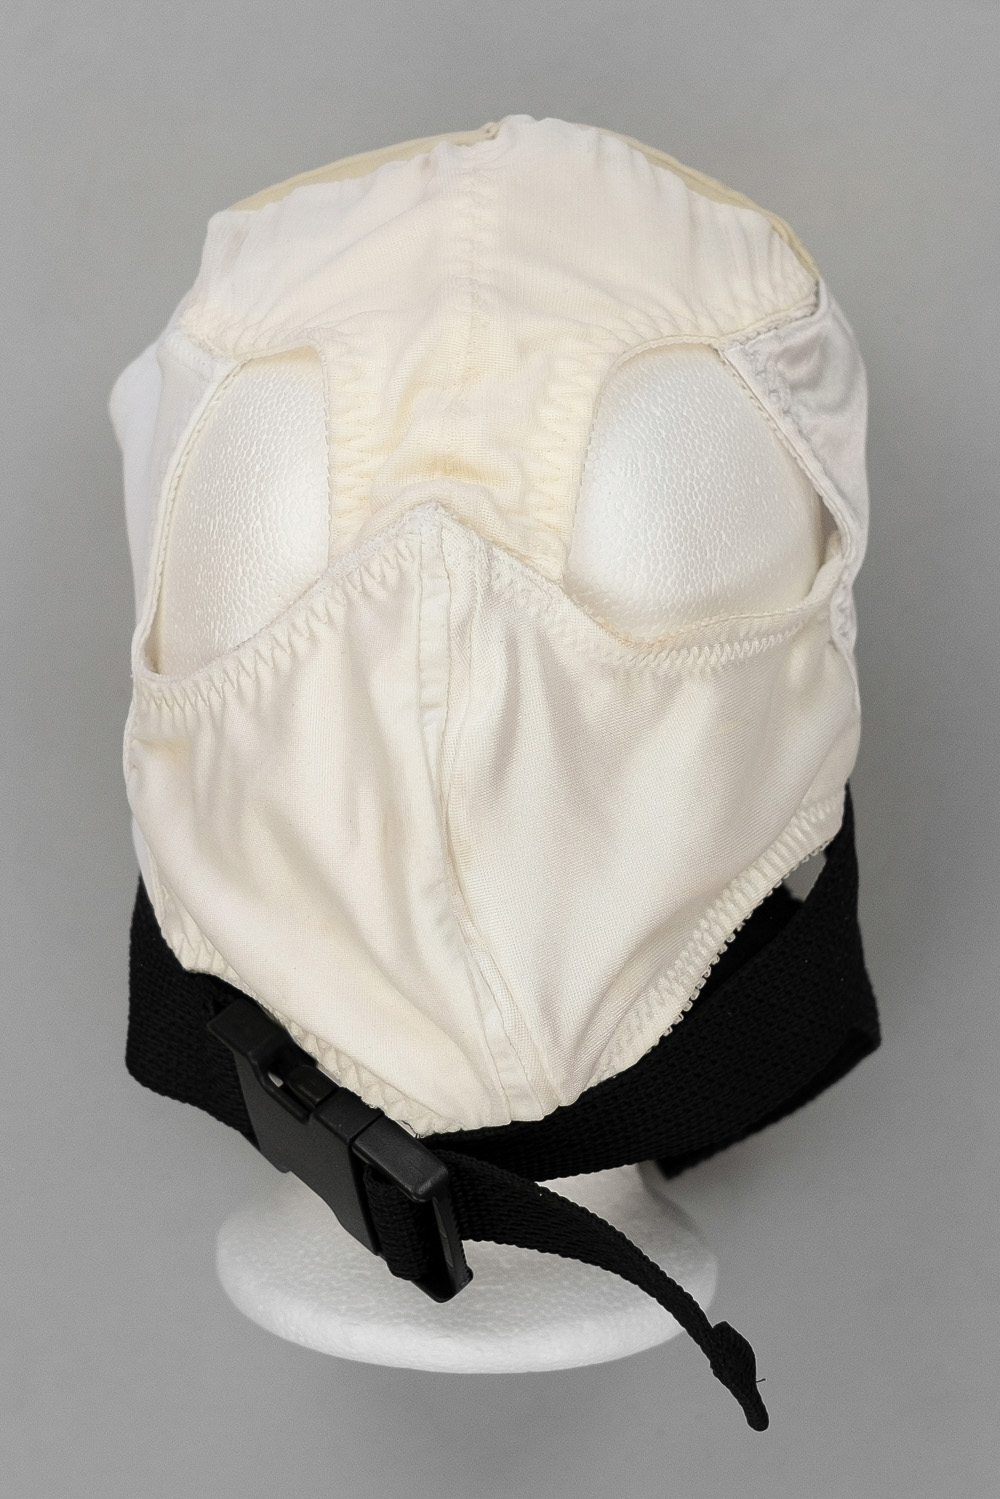 Gusset Mask in Black and White 7